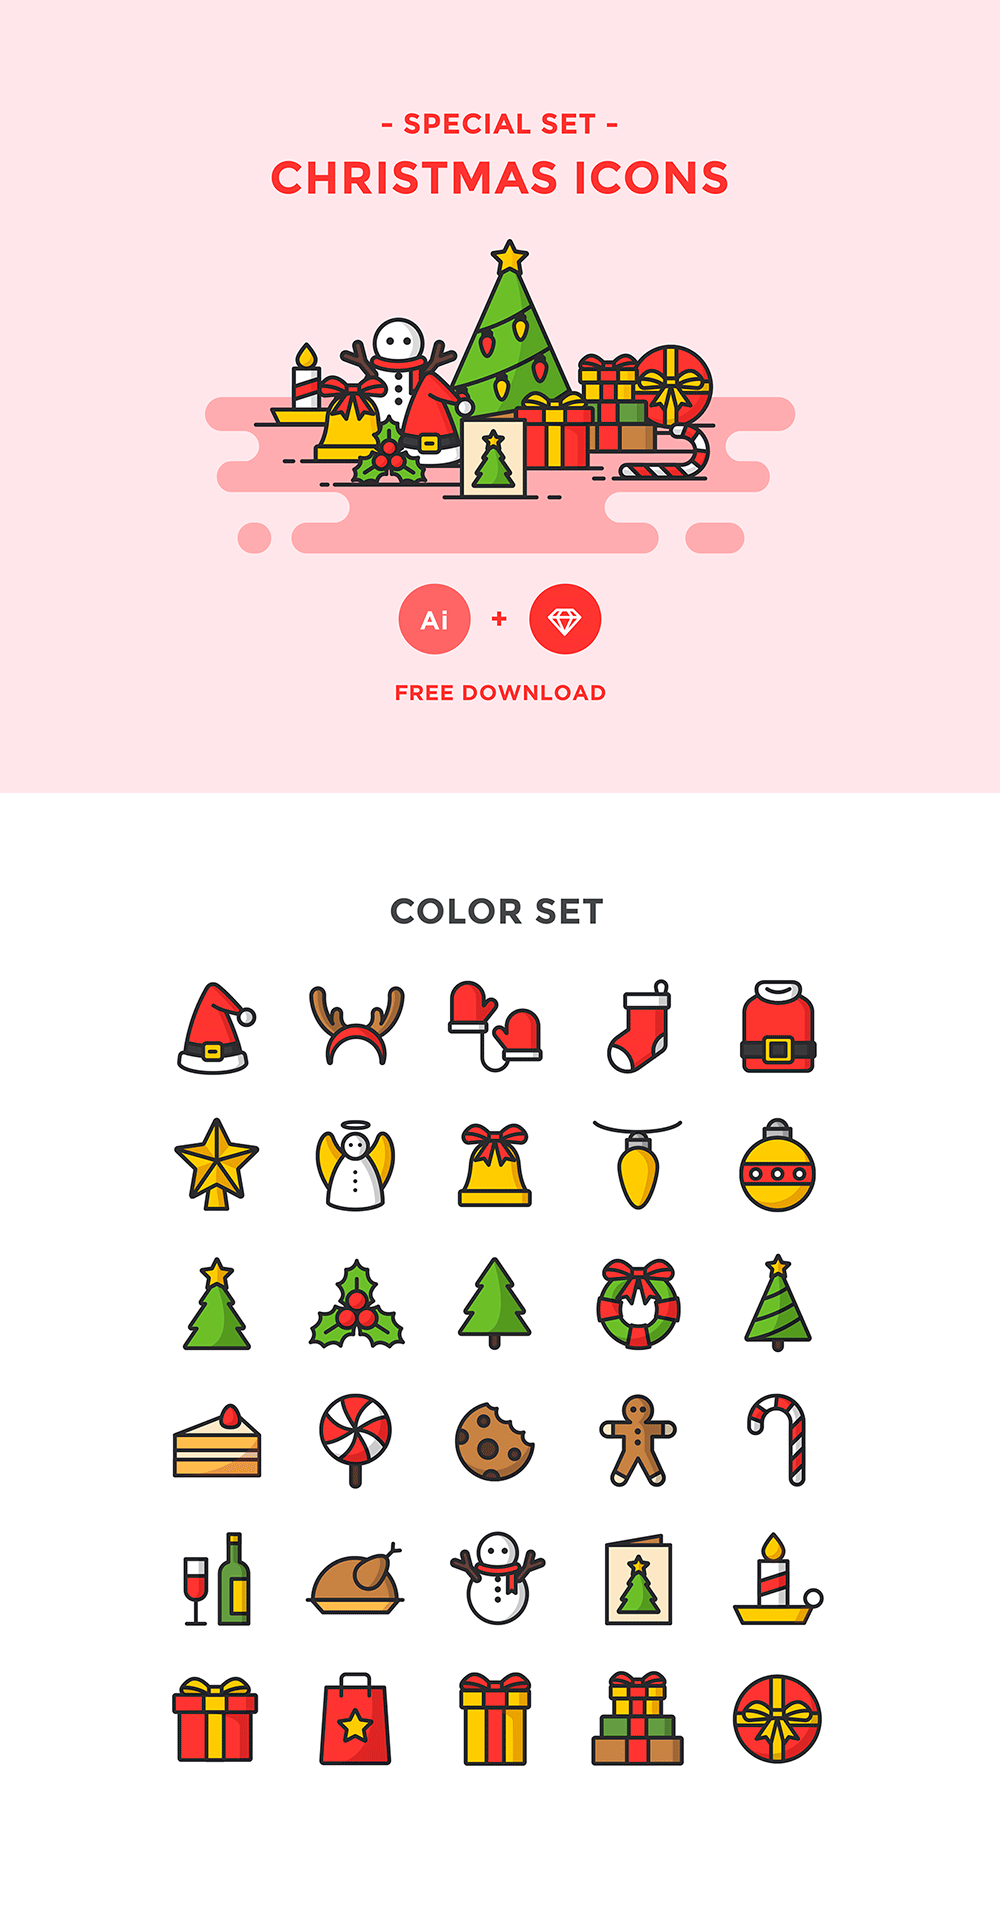 Free Christmas Icons - special set